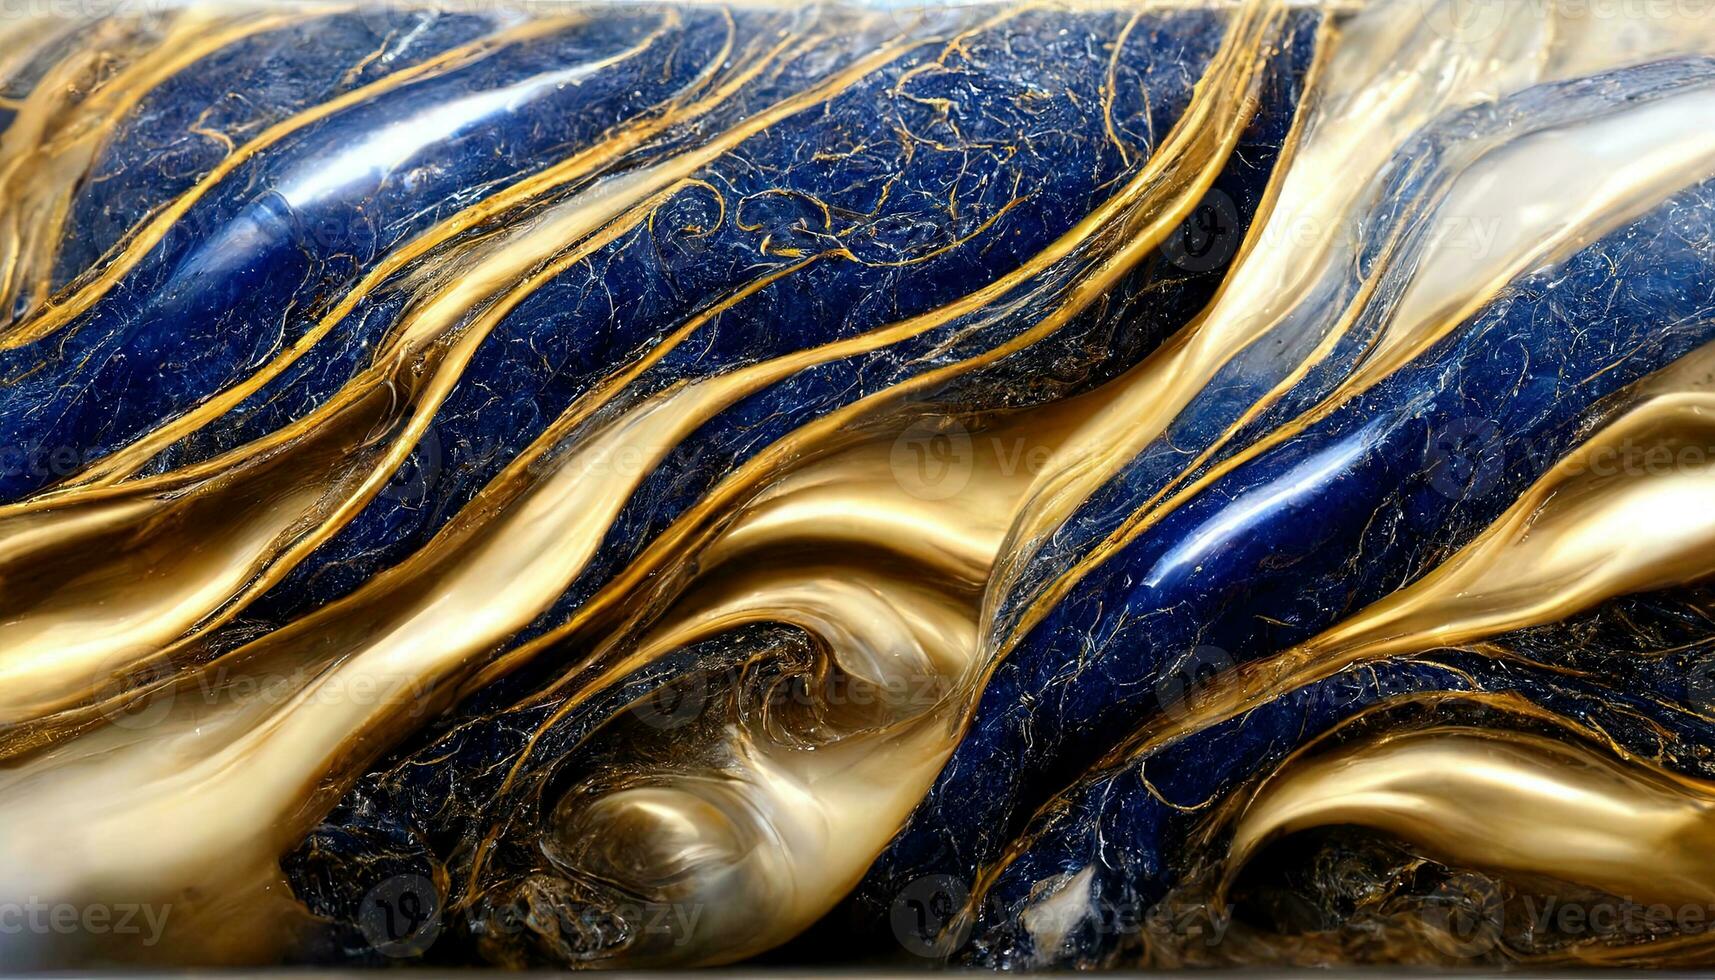 Spectacular abstract glistening blue and metalic silver solid liquid waves. Swirling golden and blue pastel pattern, shining silver color, marble geometric, vintage photo